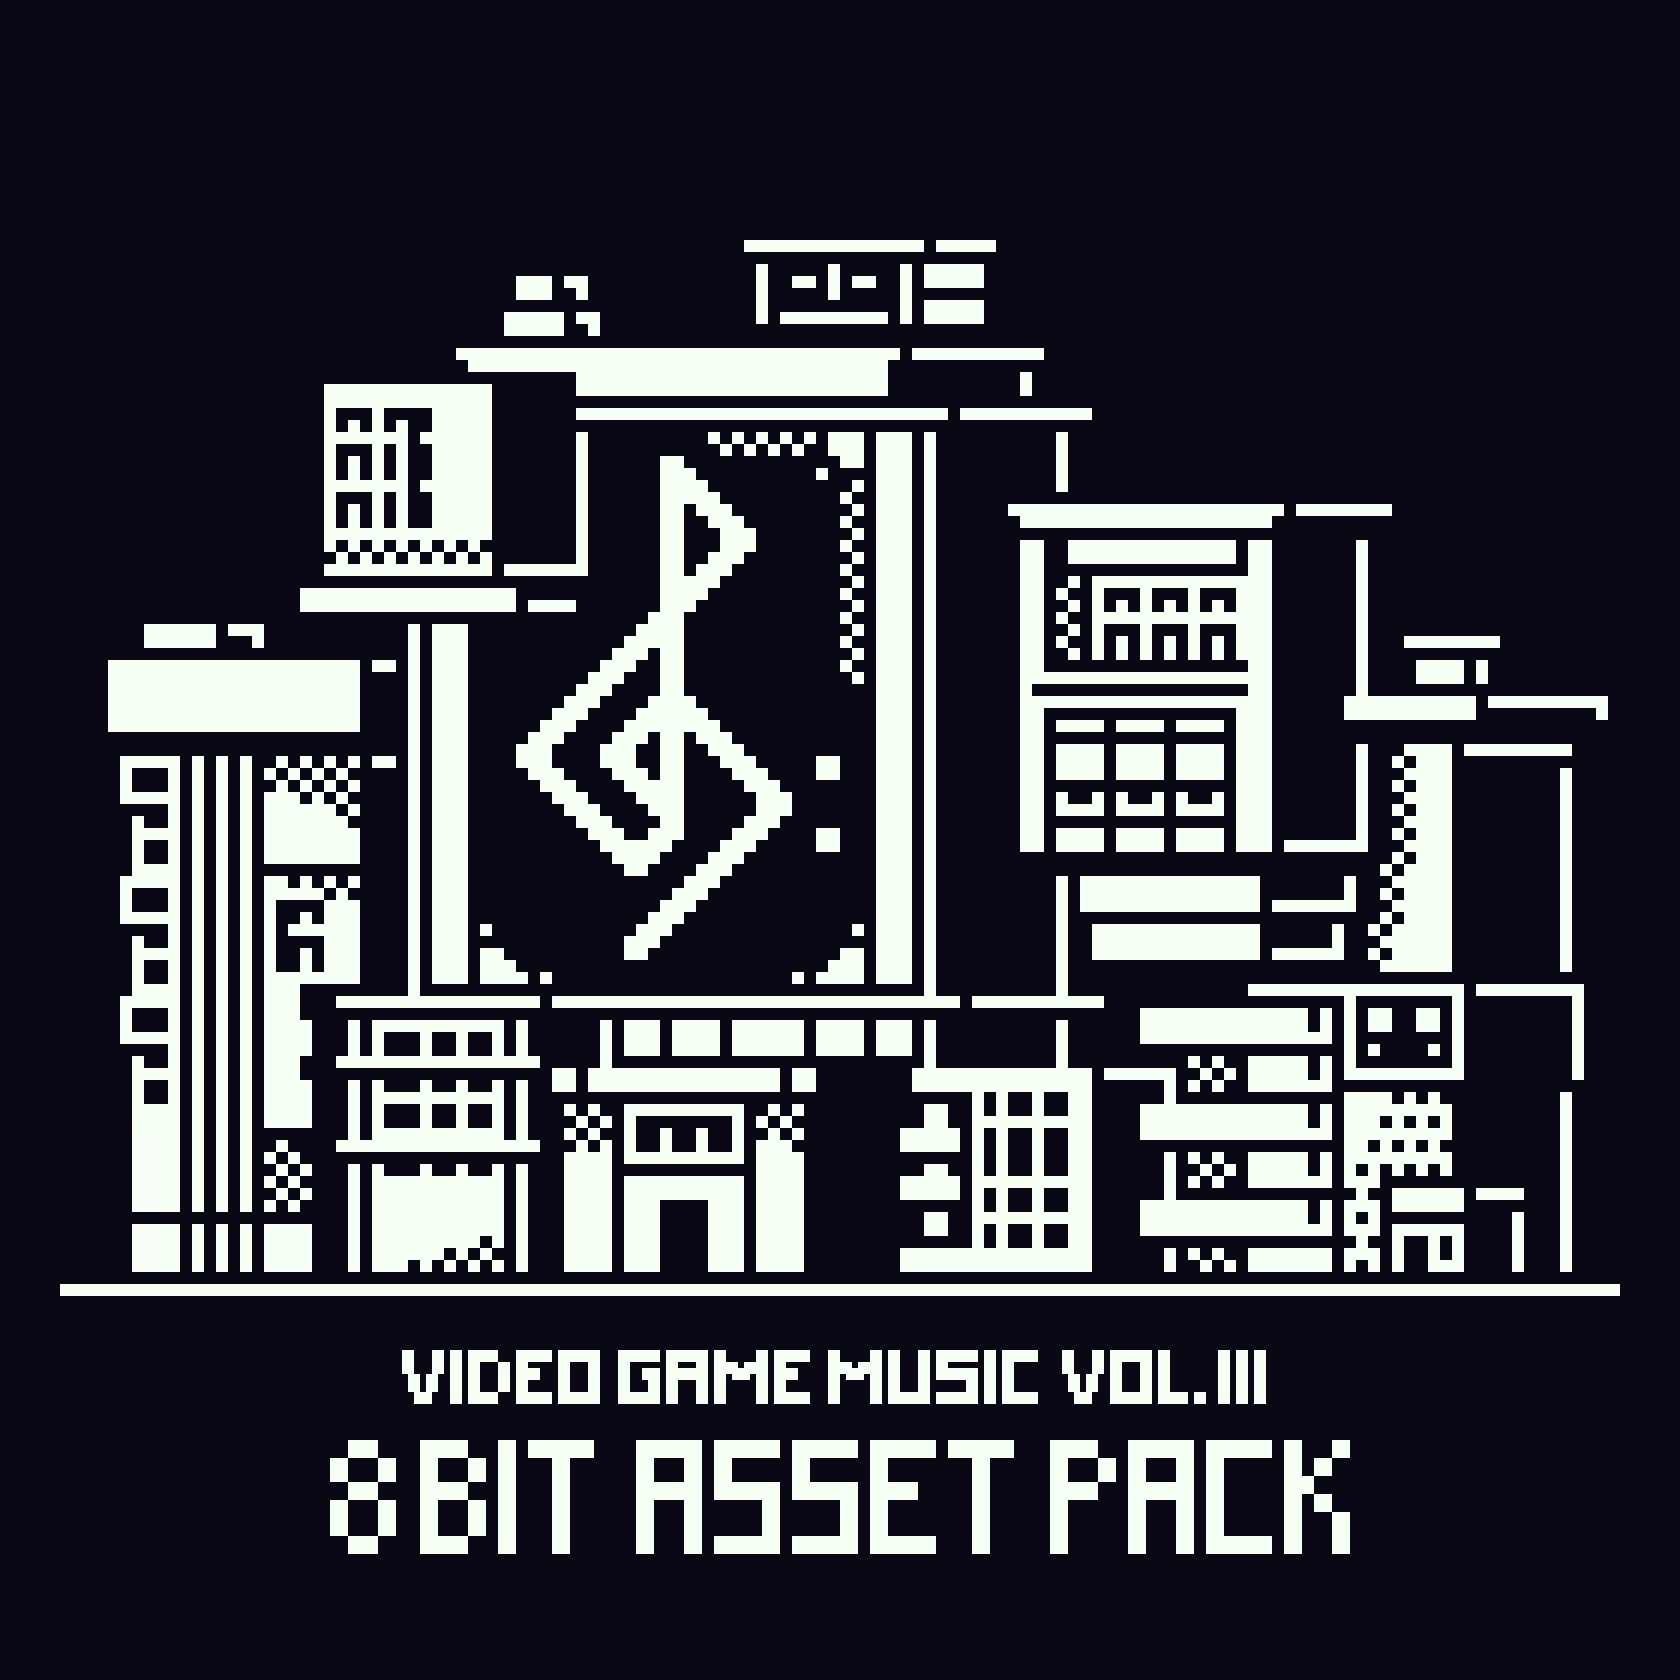 ANNOUNCEMENT: 8 Bit Asset Pack Finished!